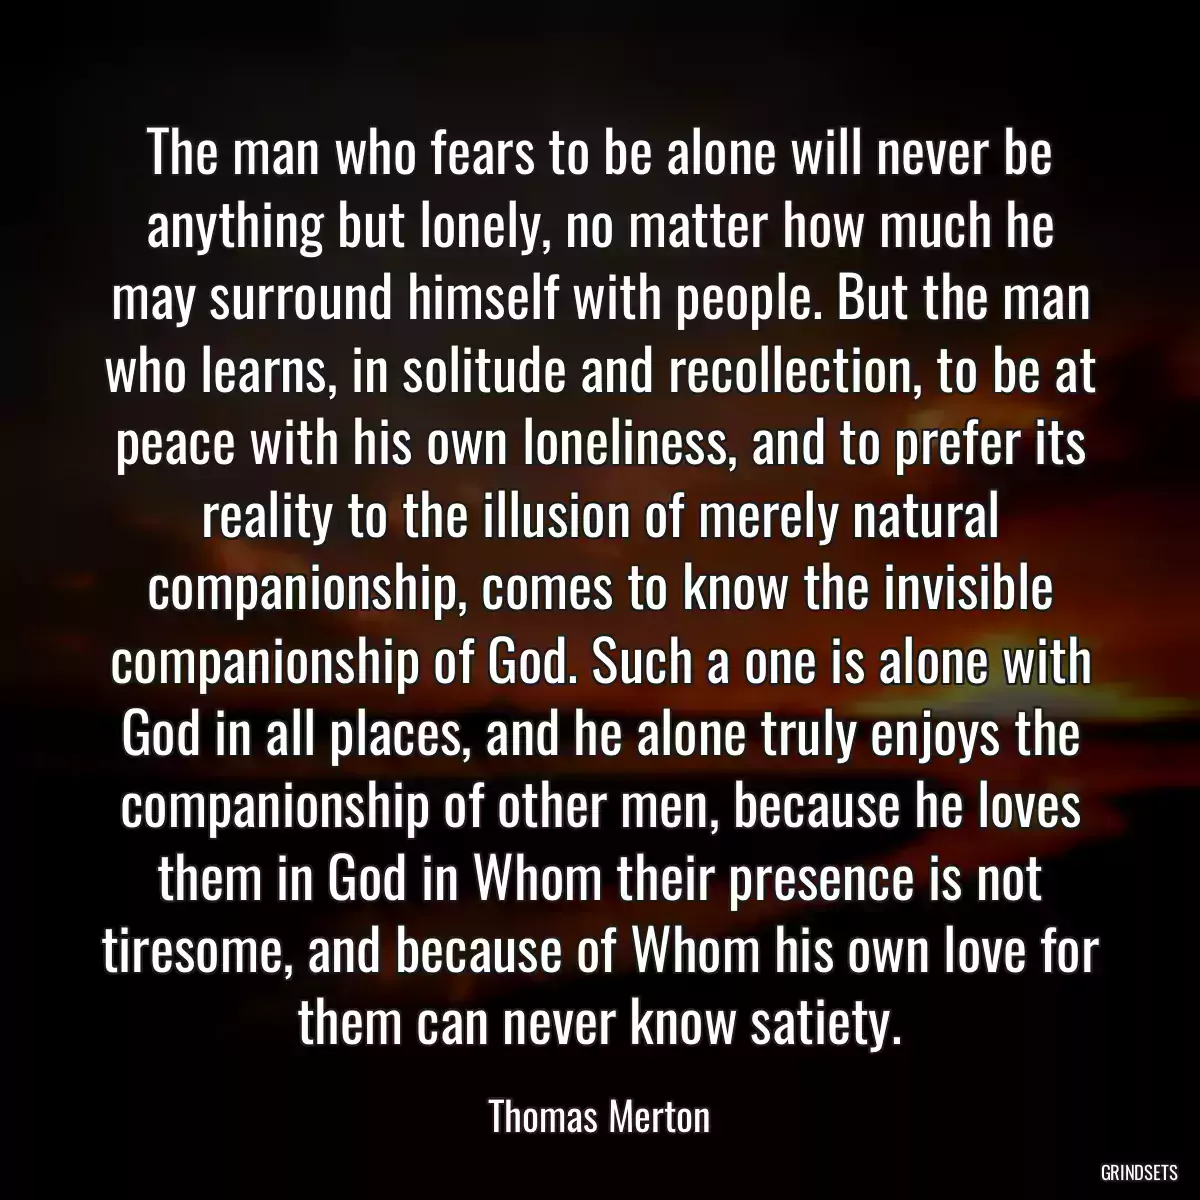 The man who fears to be alone will never be anything but lonely, no matter how much he may surround himself with people. But the man who learns, in solitude and recollection, to be at peace with his own loneliness, and to prefer its reality to the illusion of merely natural companionship, comes to know the invisible companionship of God. Such a one is alone with God in all places, and he alone truly enjoys the companionship of other men, because he loves them in God in Whom their presence is not tiresome, and because of Whom his own love for them can never know satiety.